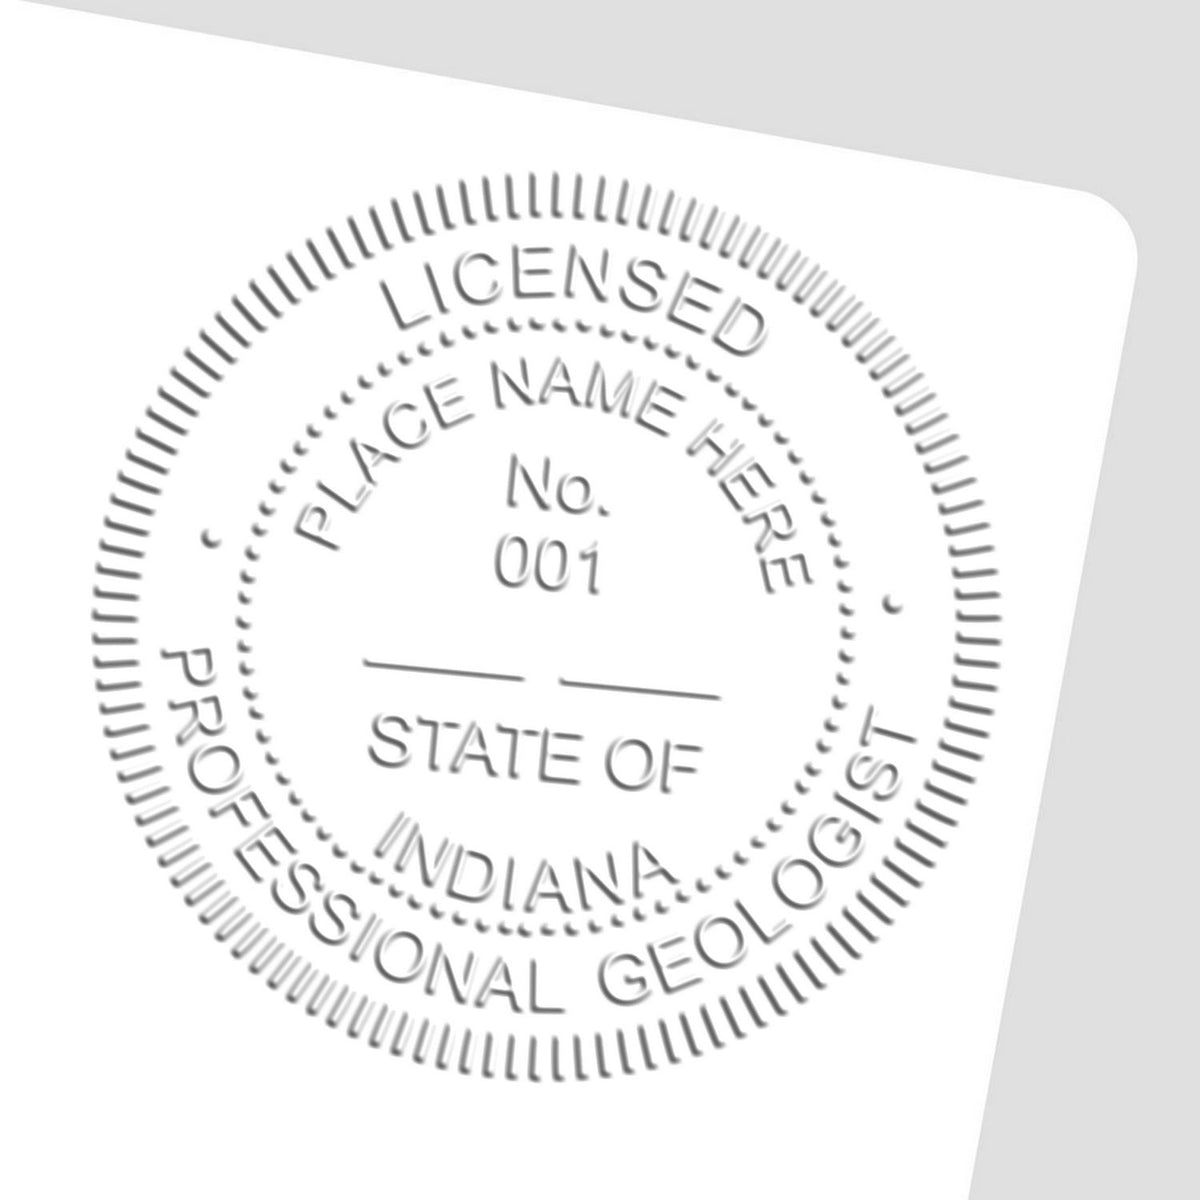 This paper is stamped with a sample imprint of the Long Reach Indiana Geology Seal, signifying its quality and reliability.